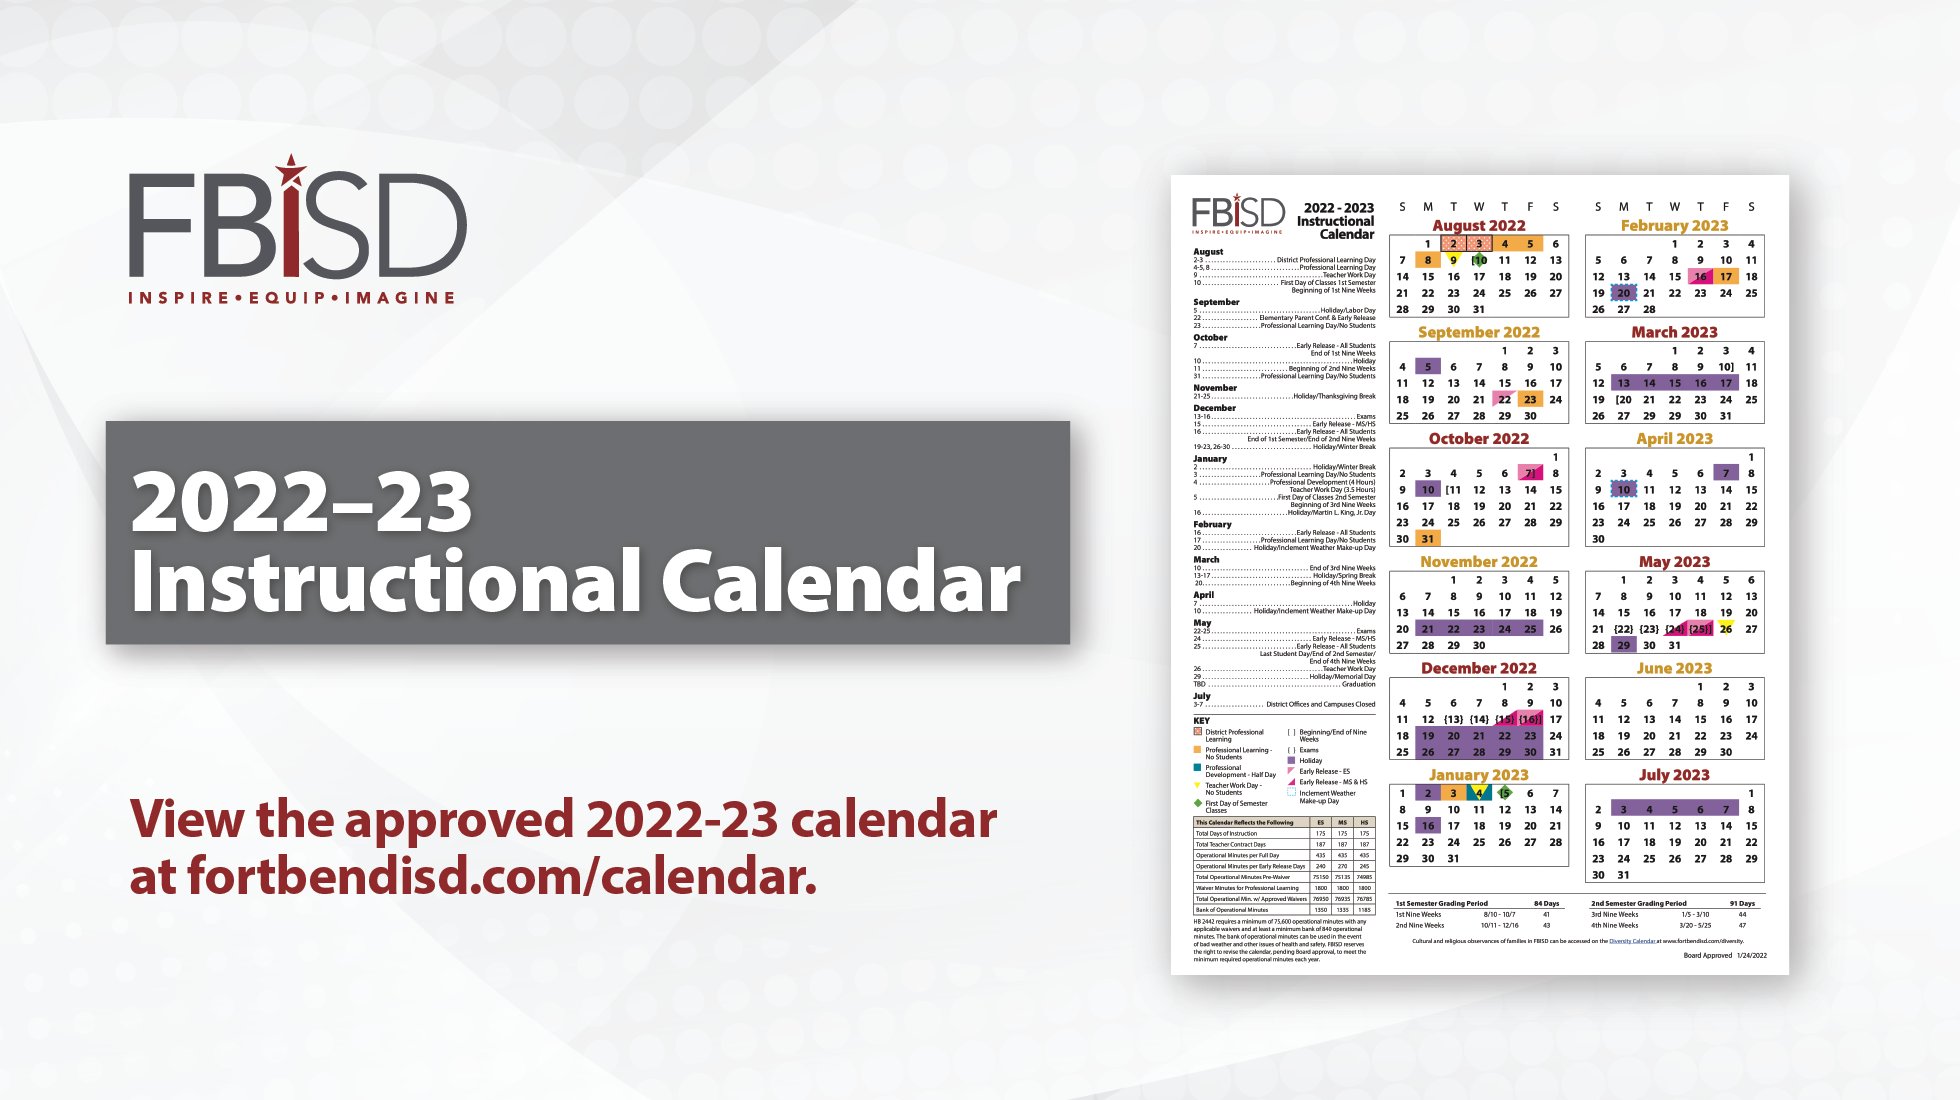 Fort Bend Isd Calendar 2022 Fort Bend Isd On Twitter: "The 2022-23 Instructional Calendar Has Been  Approved By The Fort Bend Isd Board Of Trustees. 📅 View The Approved 2022-23  Calendar At Https://T.co/Sussnjxanh. Https://T.co/Y4Gaewjwxc" / Twitter